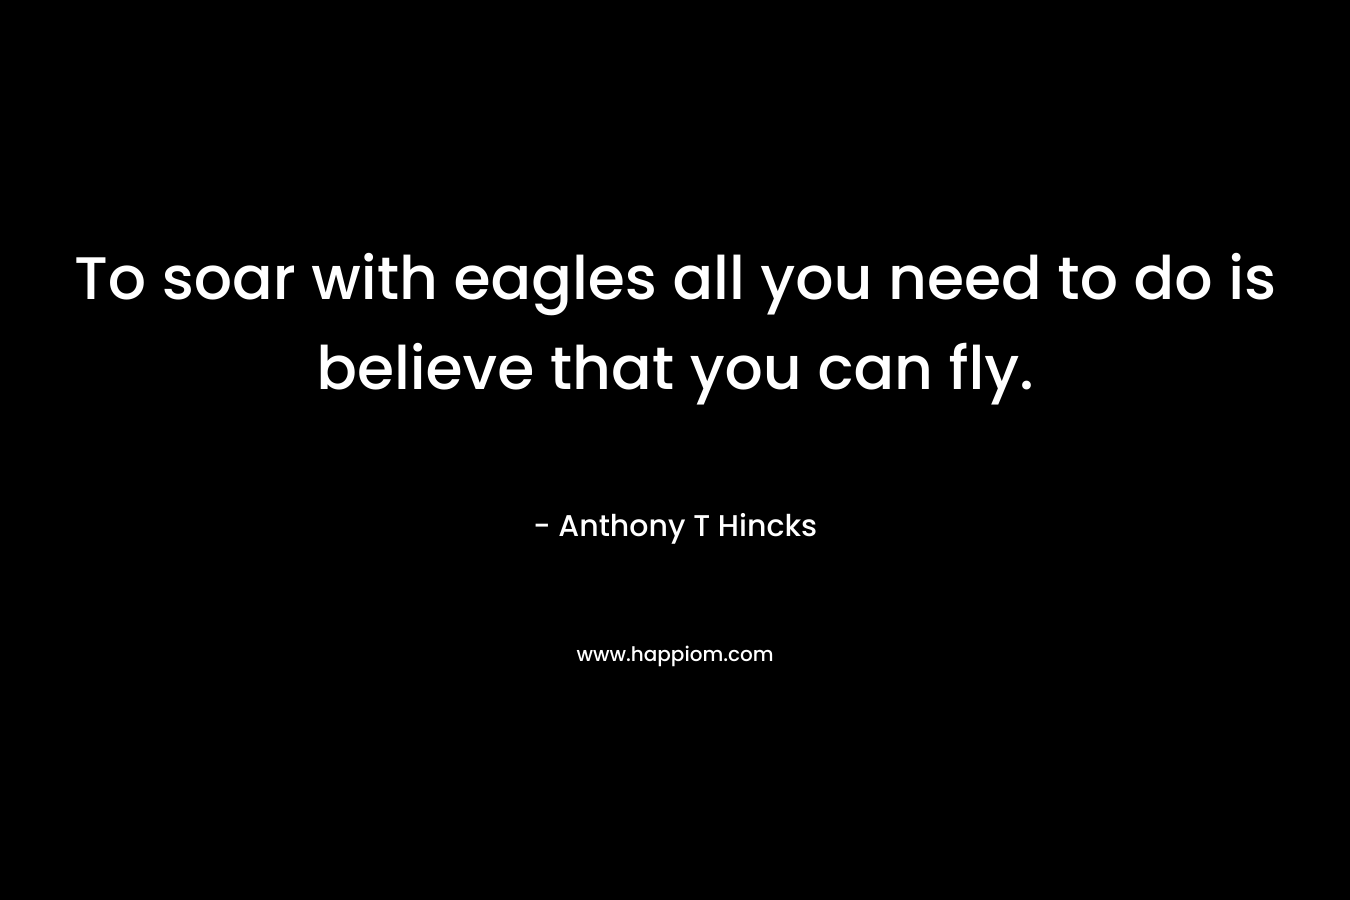 To soar with eagles all you need to do is believe that you can fly. – Anthony T Hincks